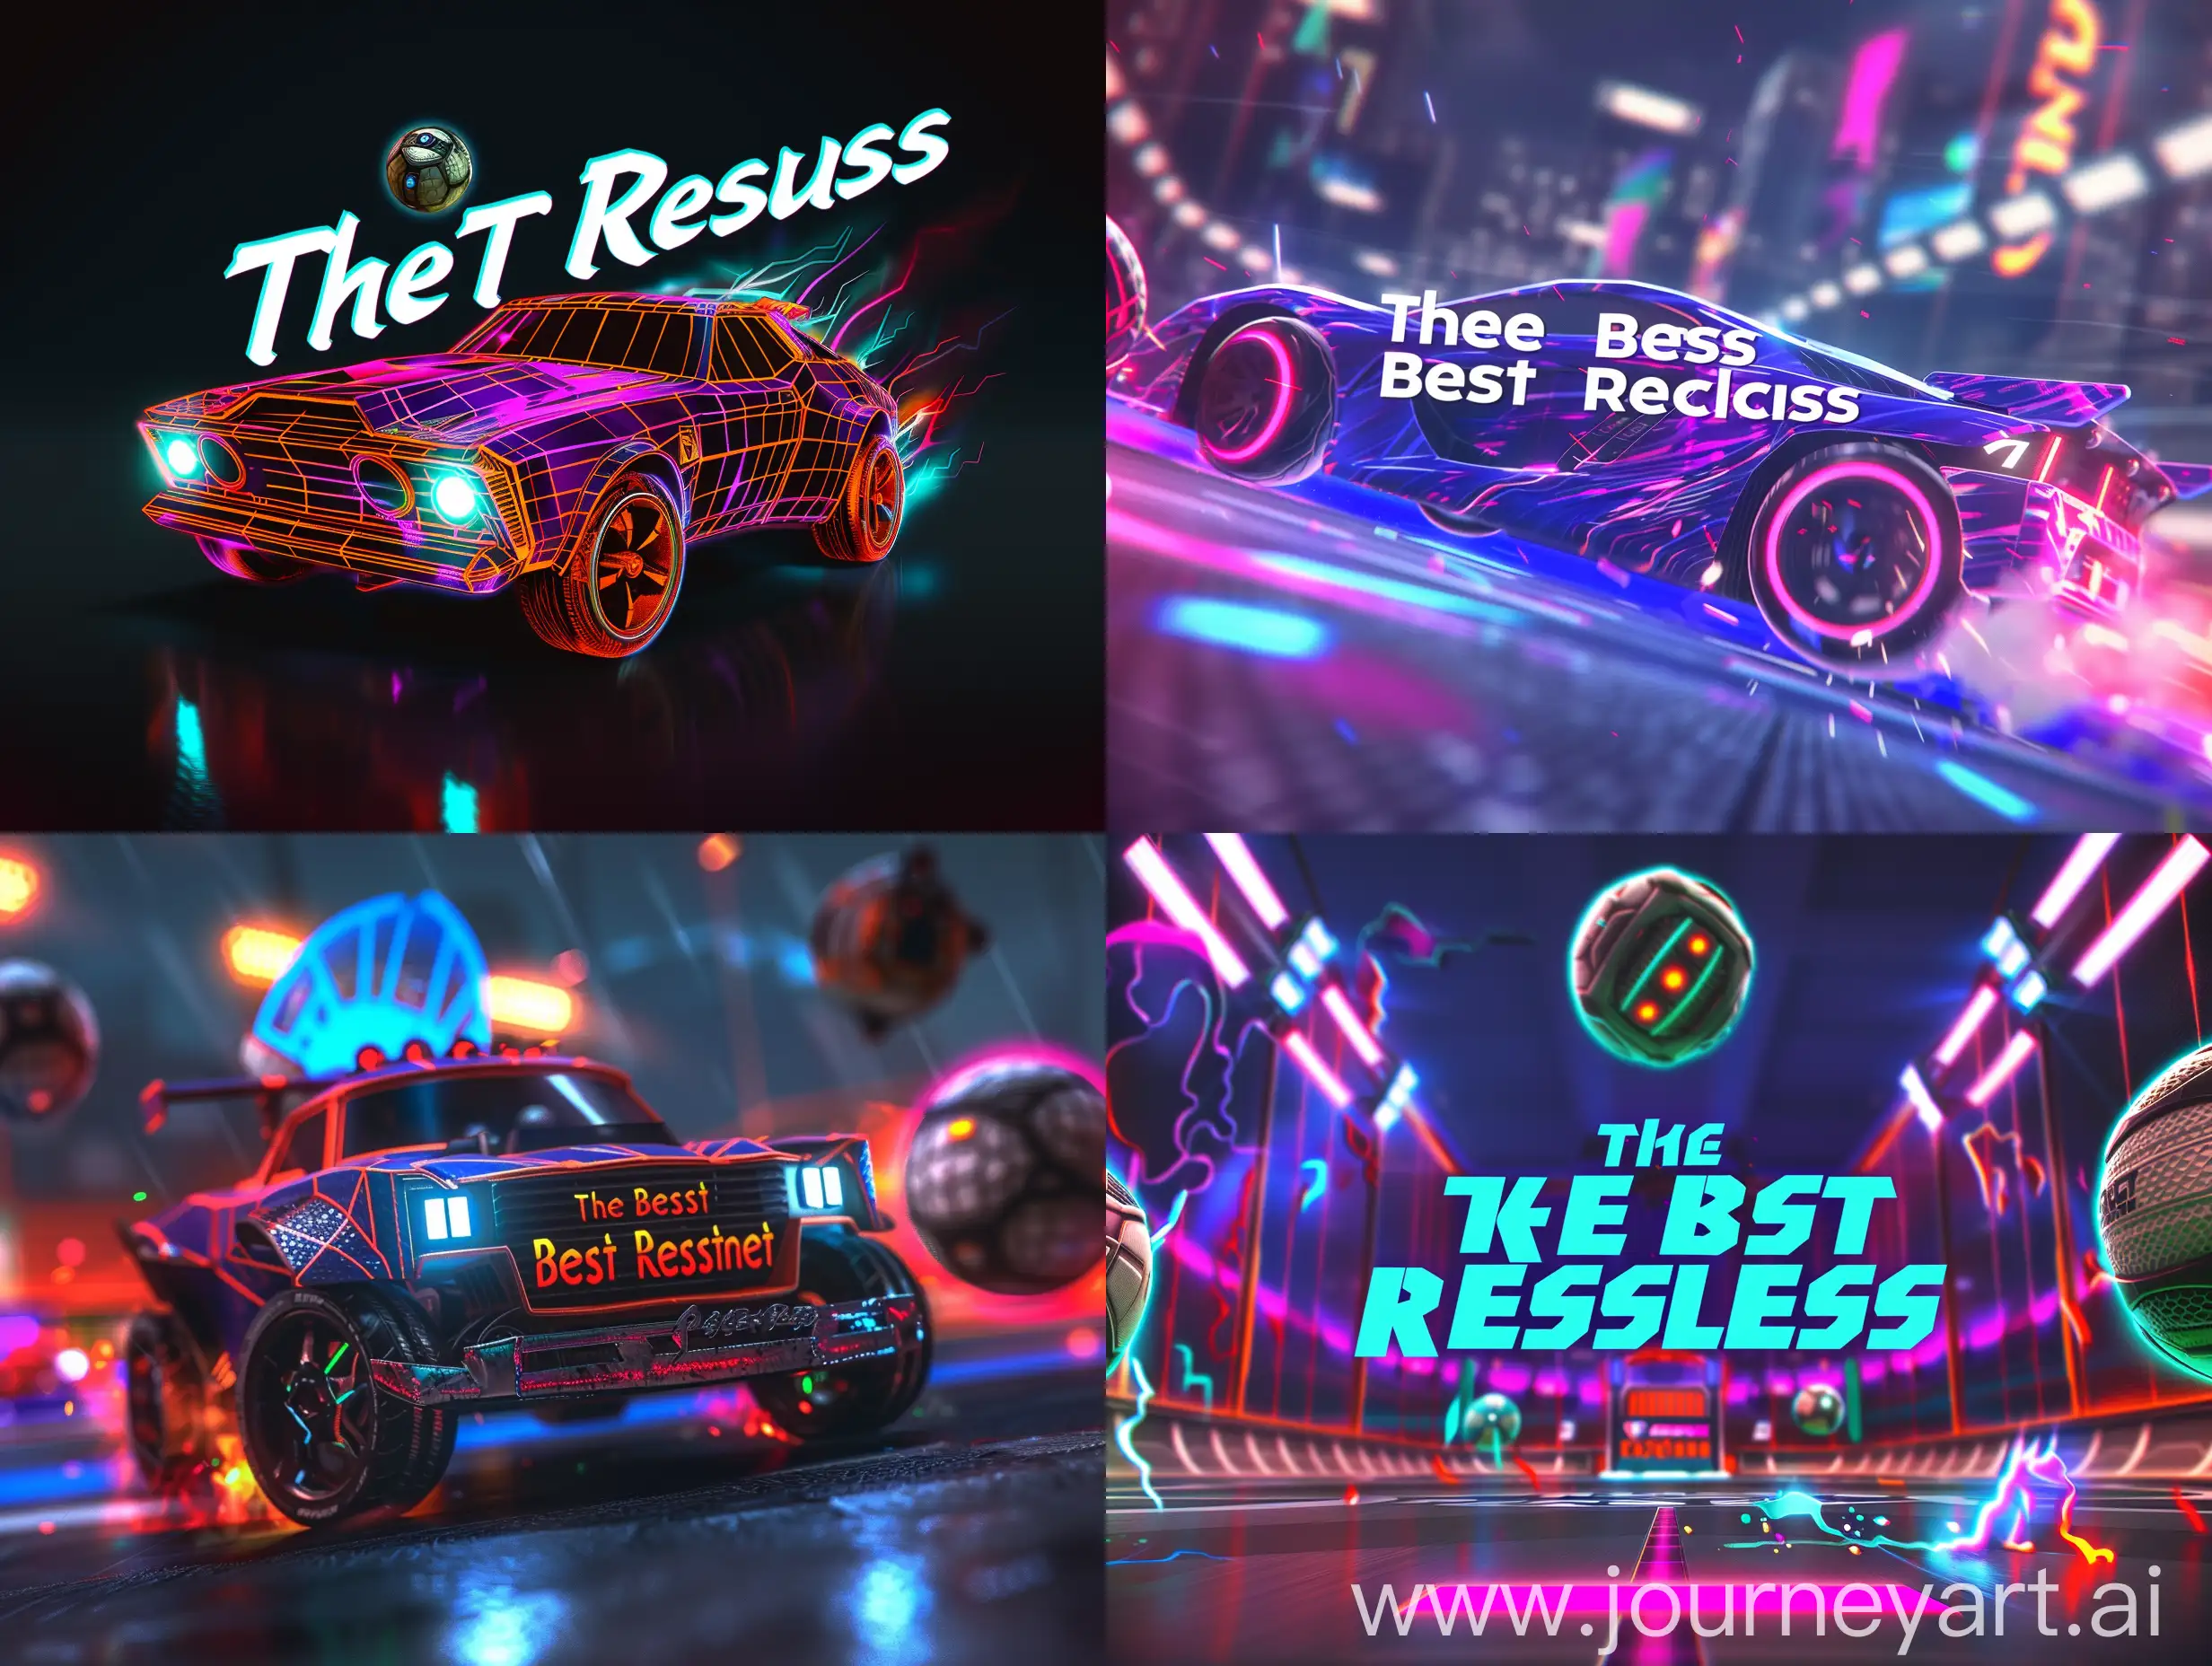 Rocket-League-Best-Replays-Event-Banner-Dynamic-3D-Graphics-with-Shadows-and-Glow